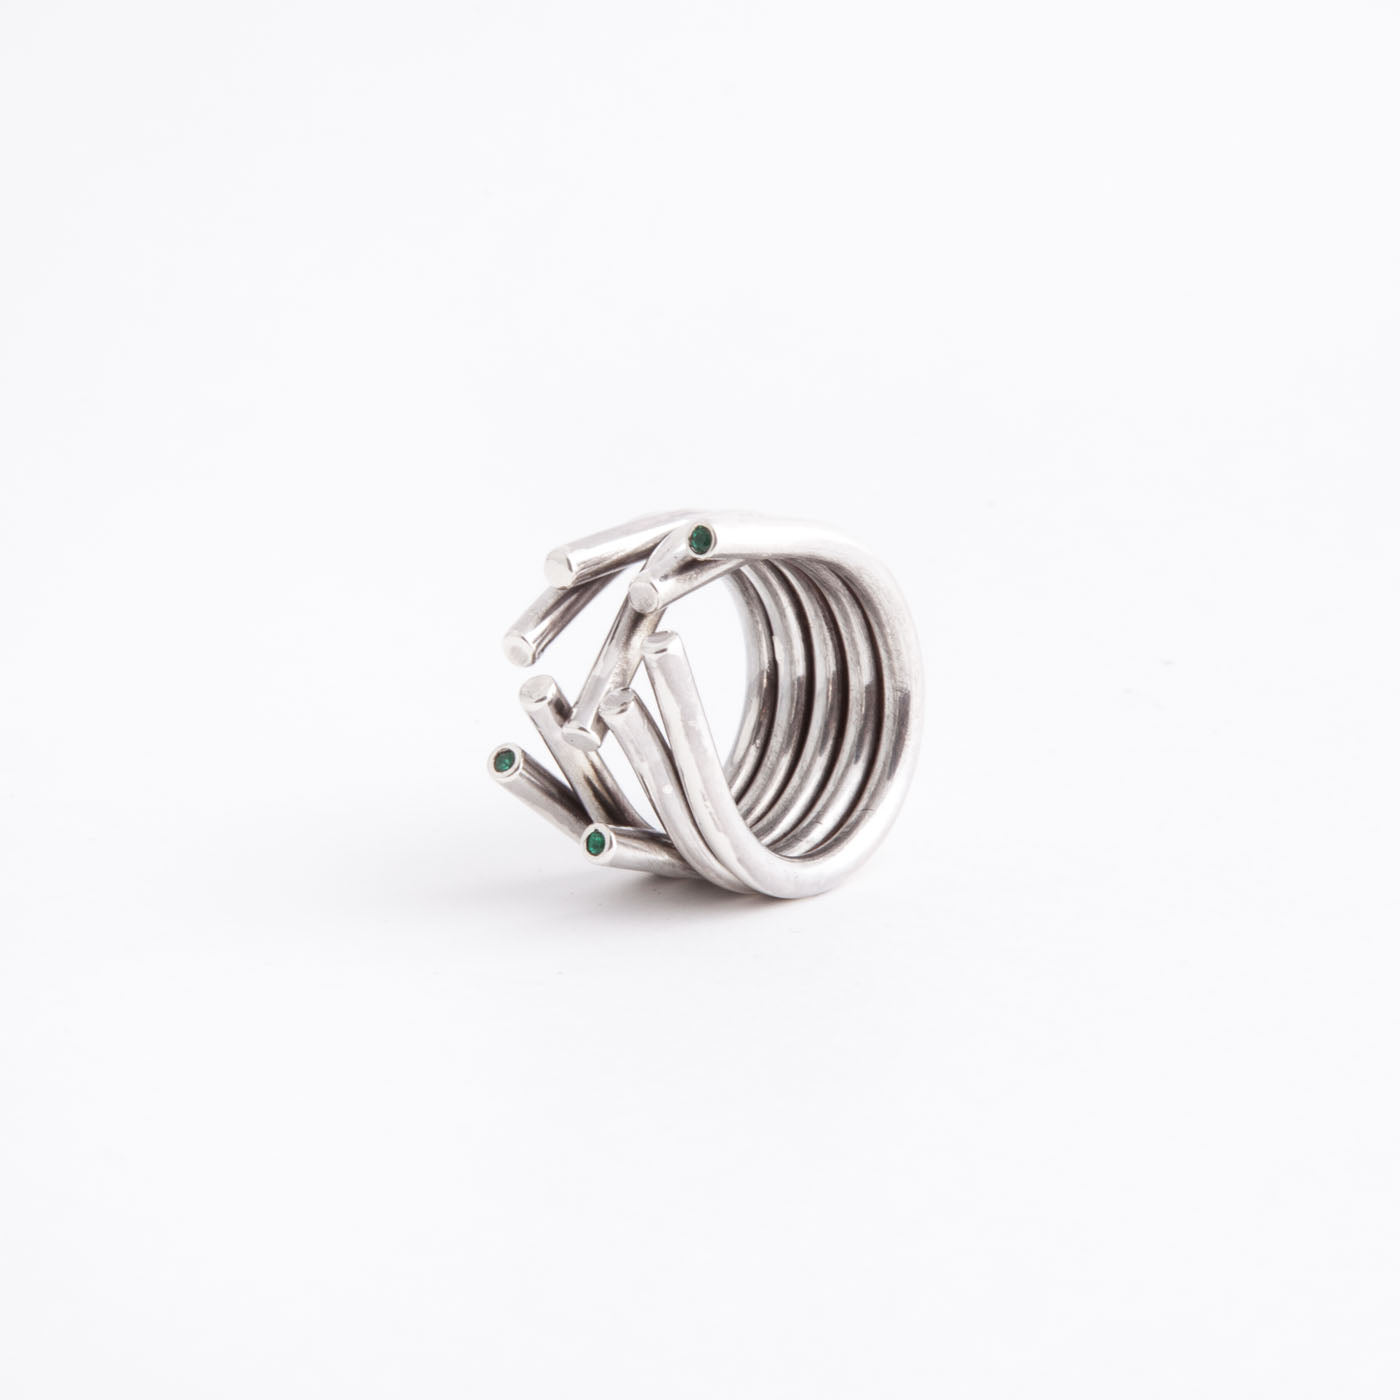 Ring Chaotic silver with green emeralds standing product view innan jewellery independent atelier berlin